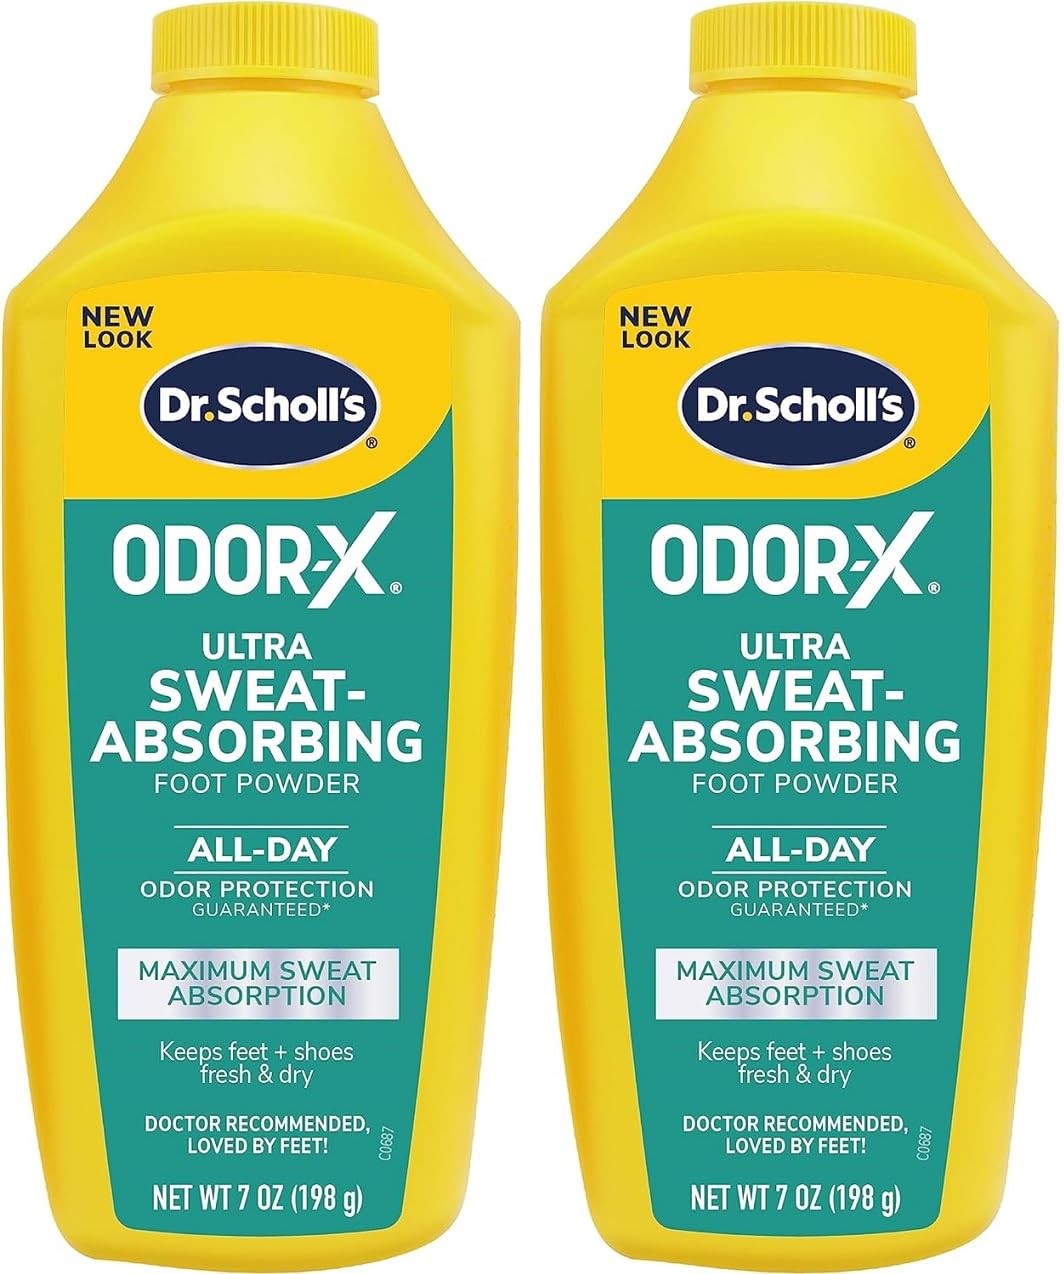 Dr. Scholl's ULTRA-SWEAT ABSORBING FOOT POWDER, 7 oz // Maximum Sweat Absorption, All-Day Odor Protection, Keeps Feet Fresh & Dry - Pack of 2